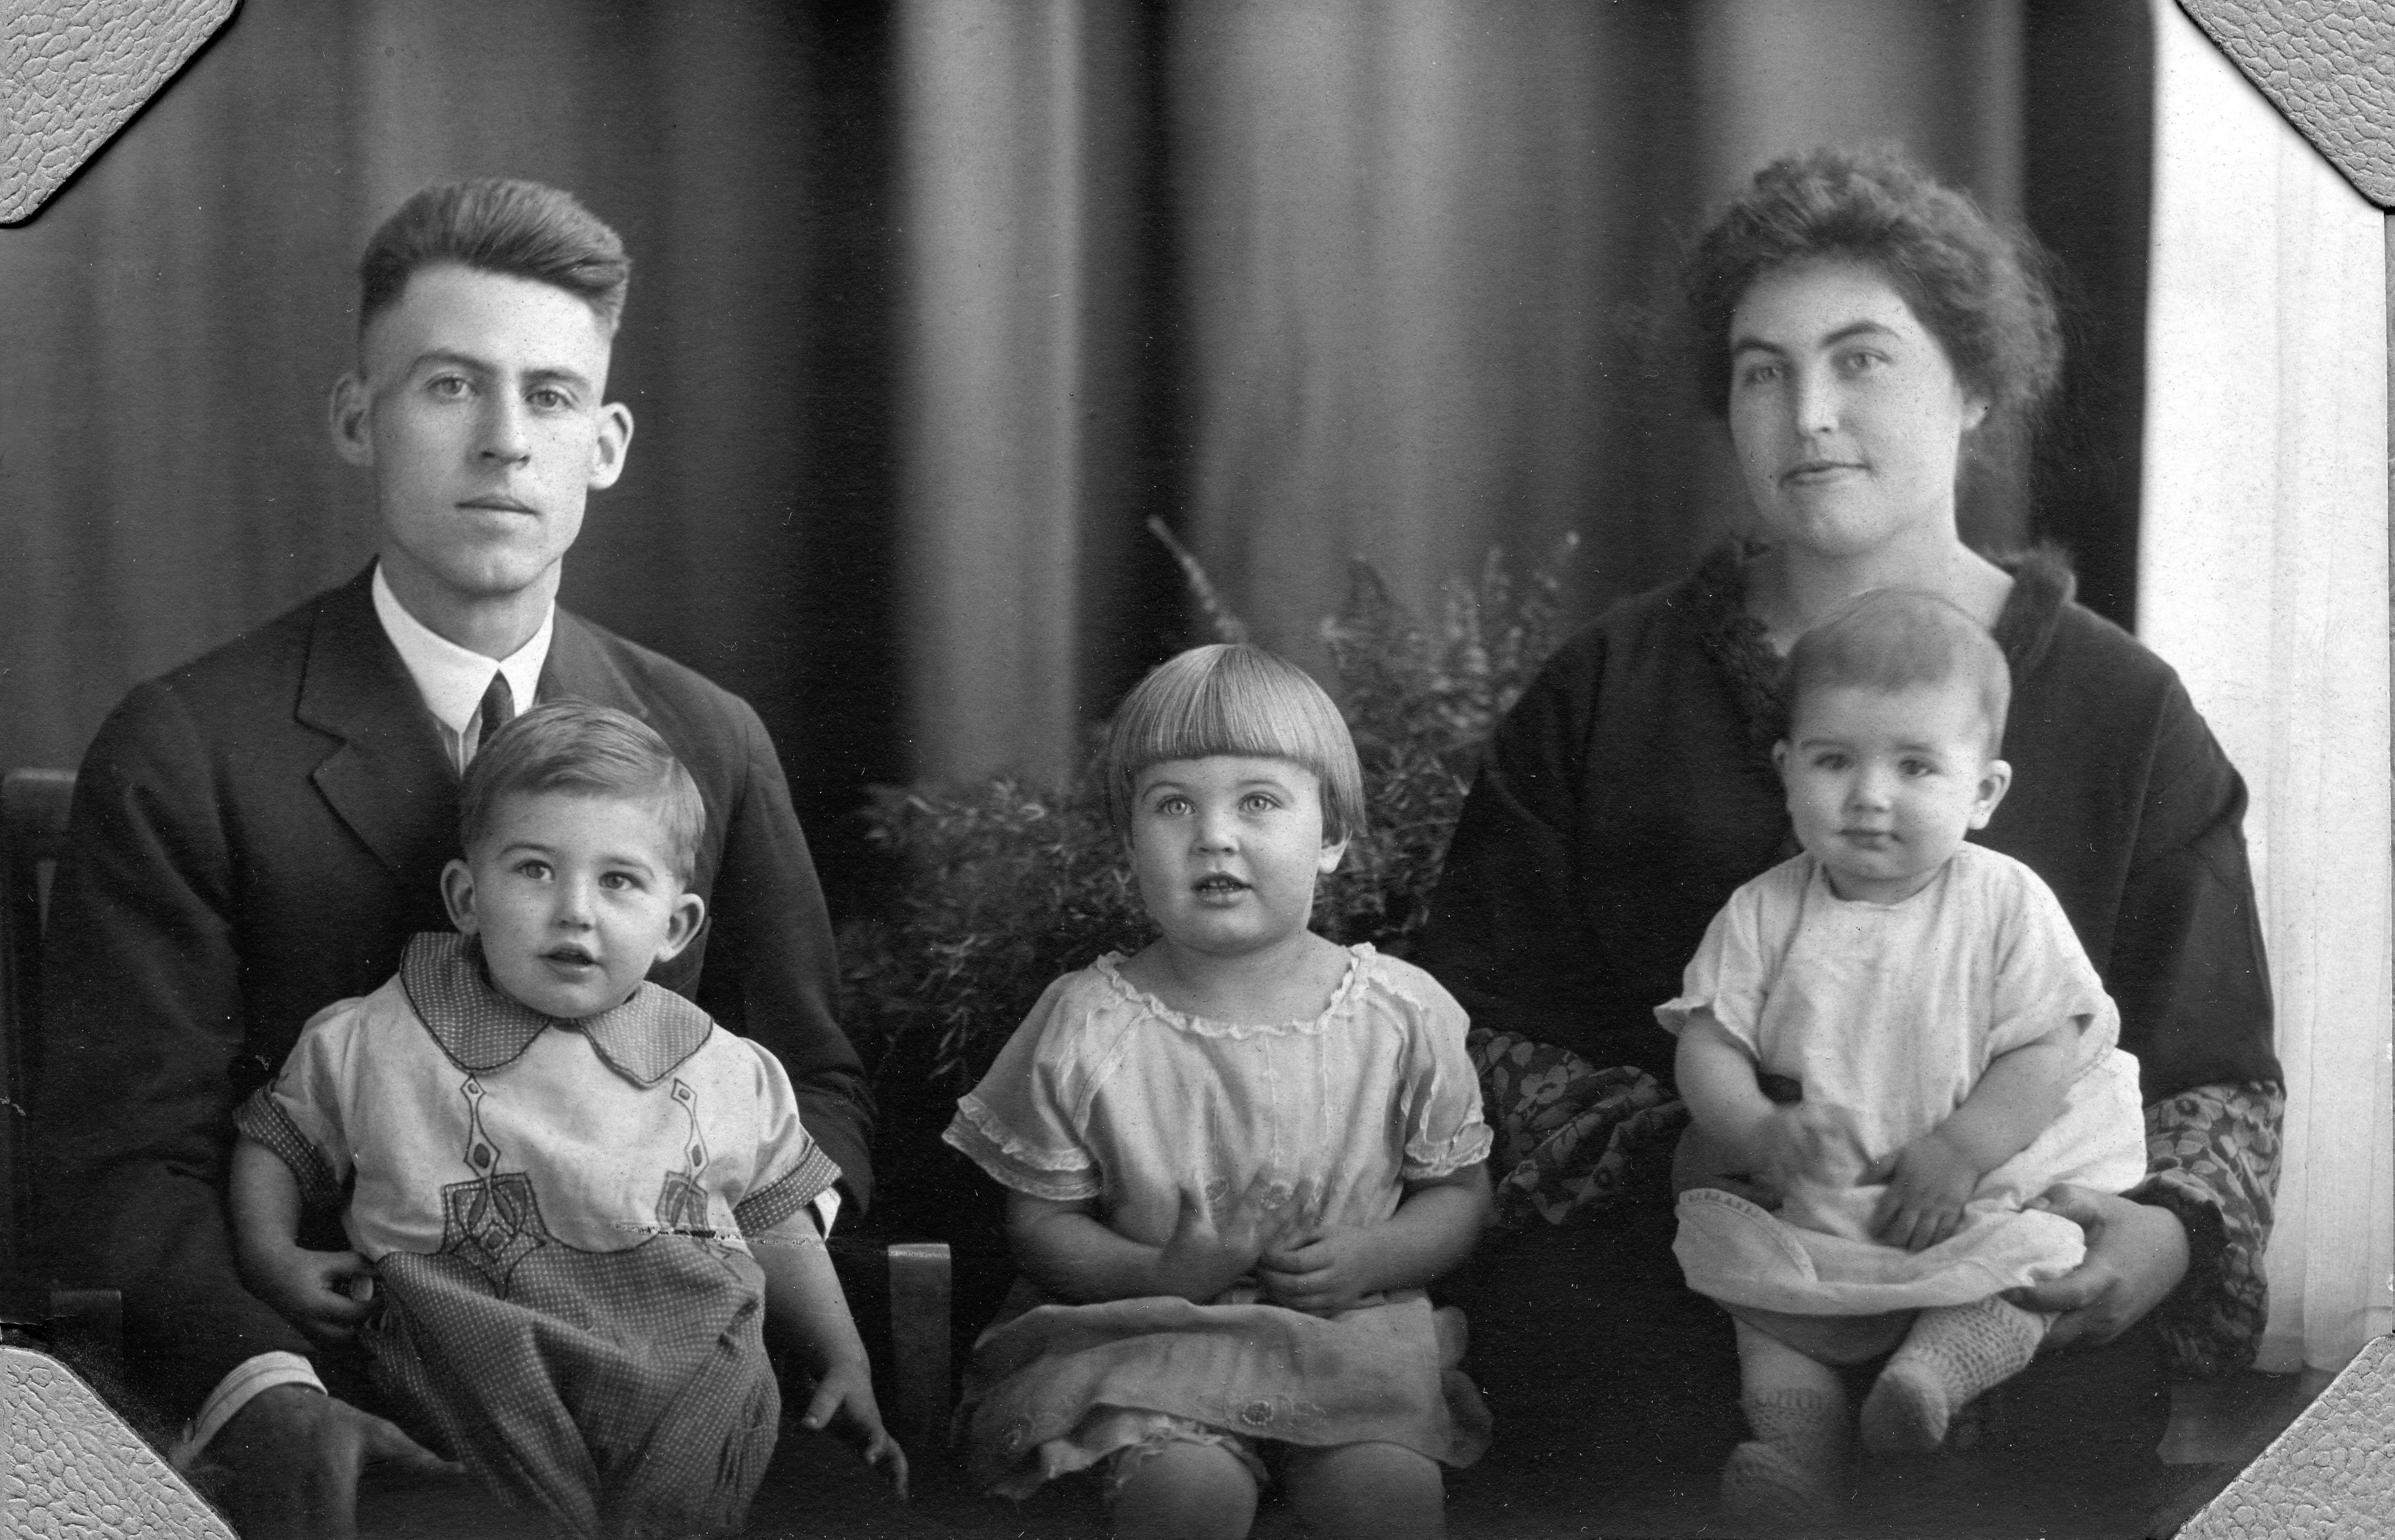 Wilford and Marie Cole and their children, Bill, Thelma, and Dick, in Havre, Montana in 1926.